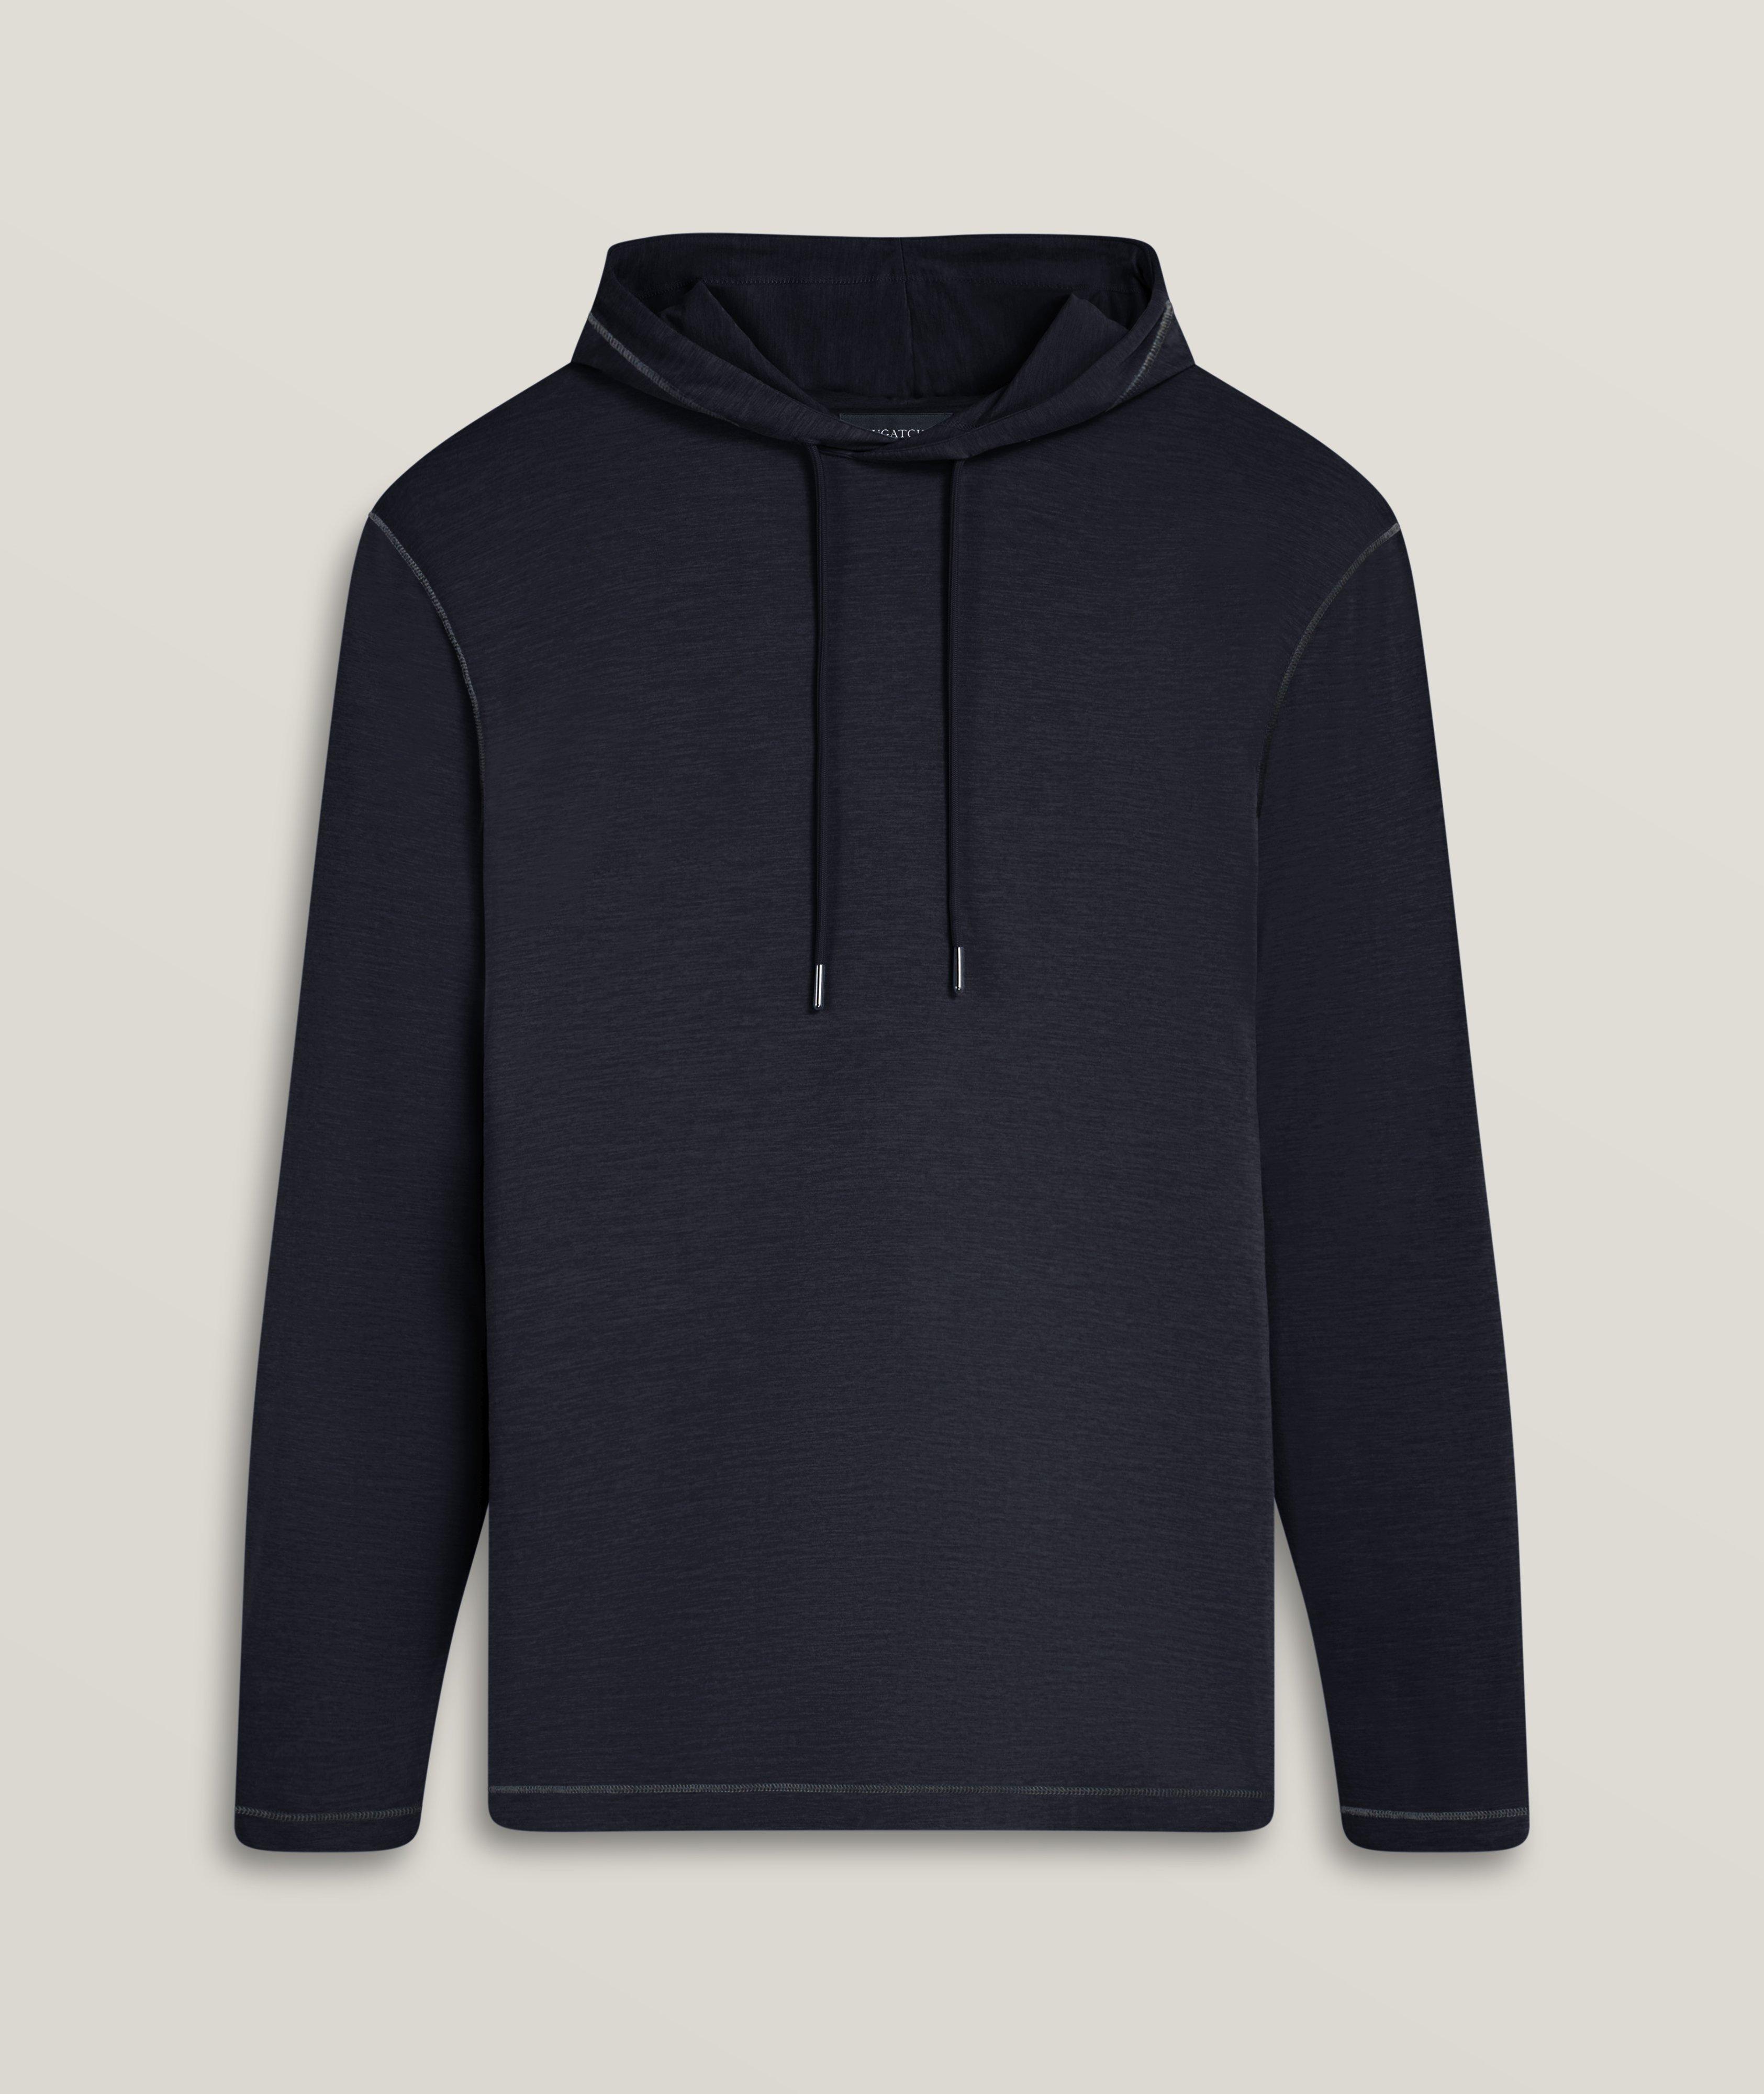 UV50 Performance Stretch-Fabric Hooded Sweater image 0